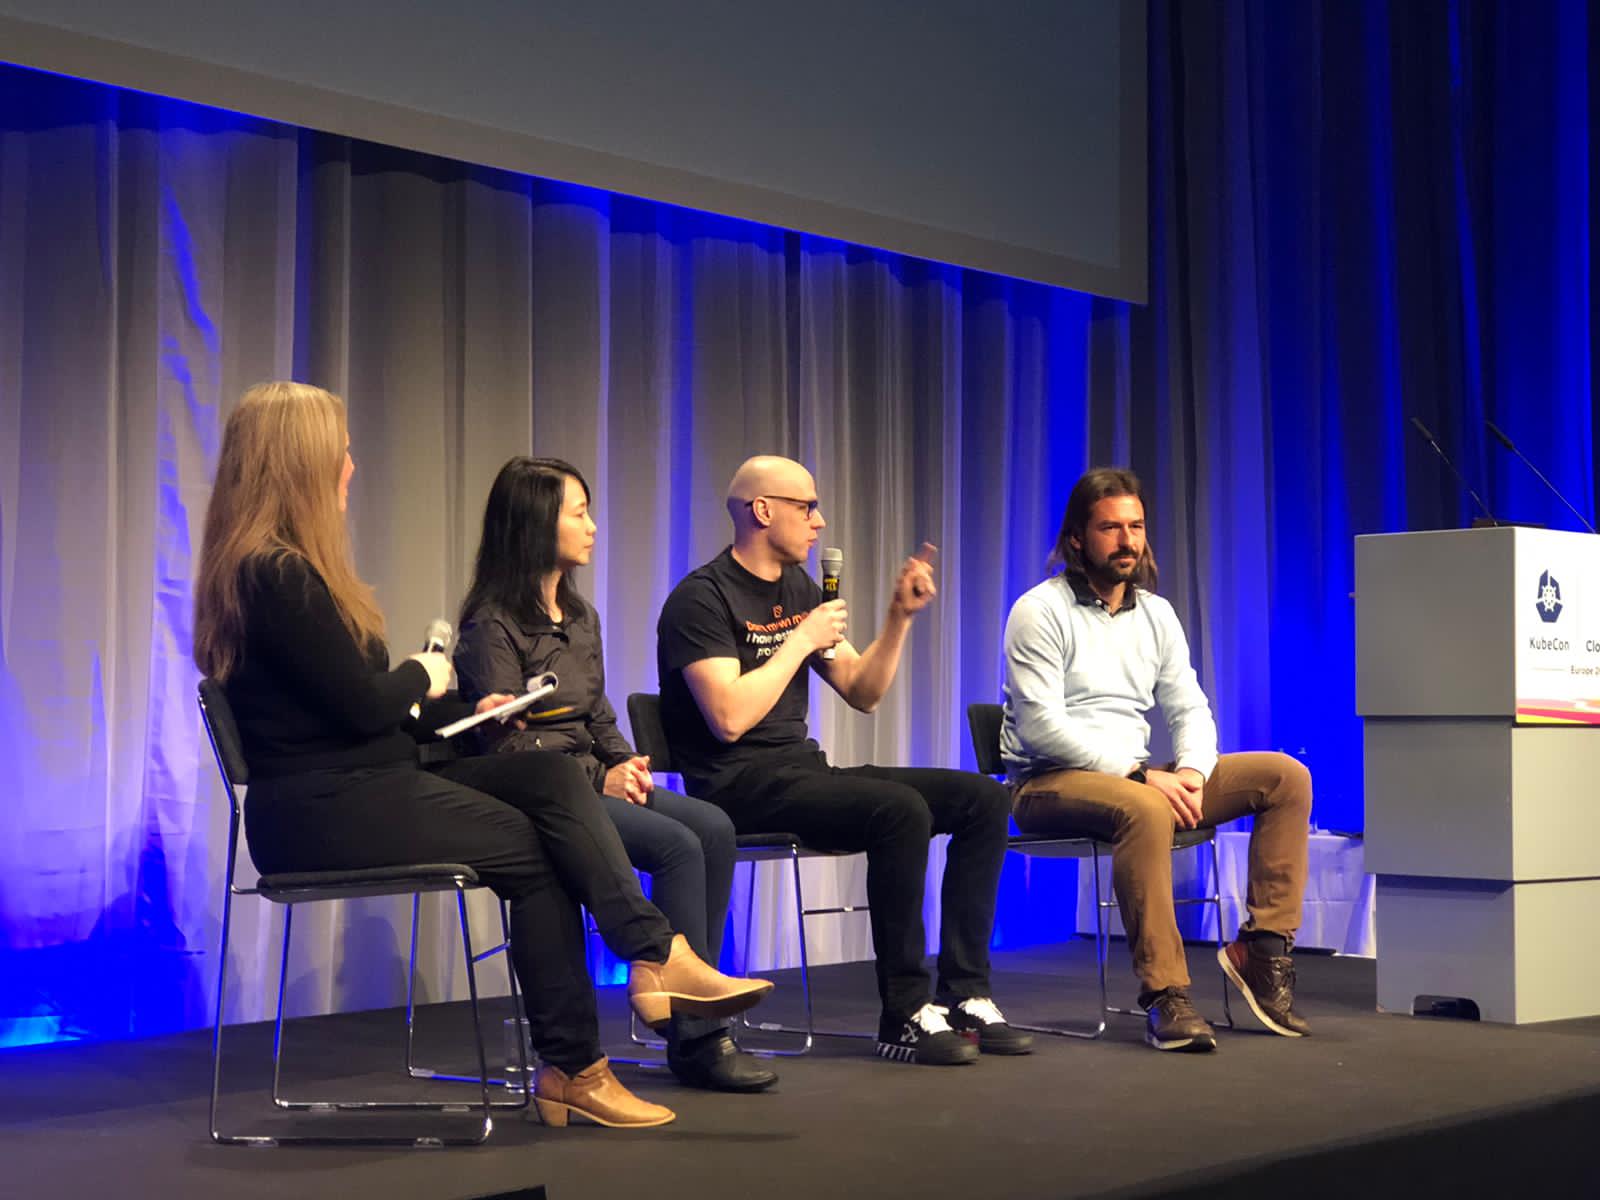 Kubernetes Operator Panel Discussion